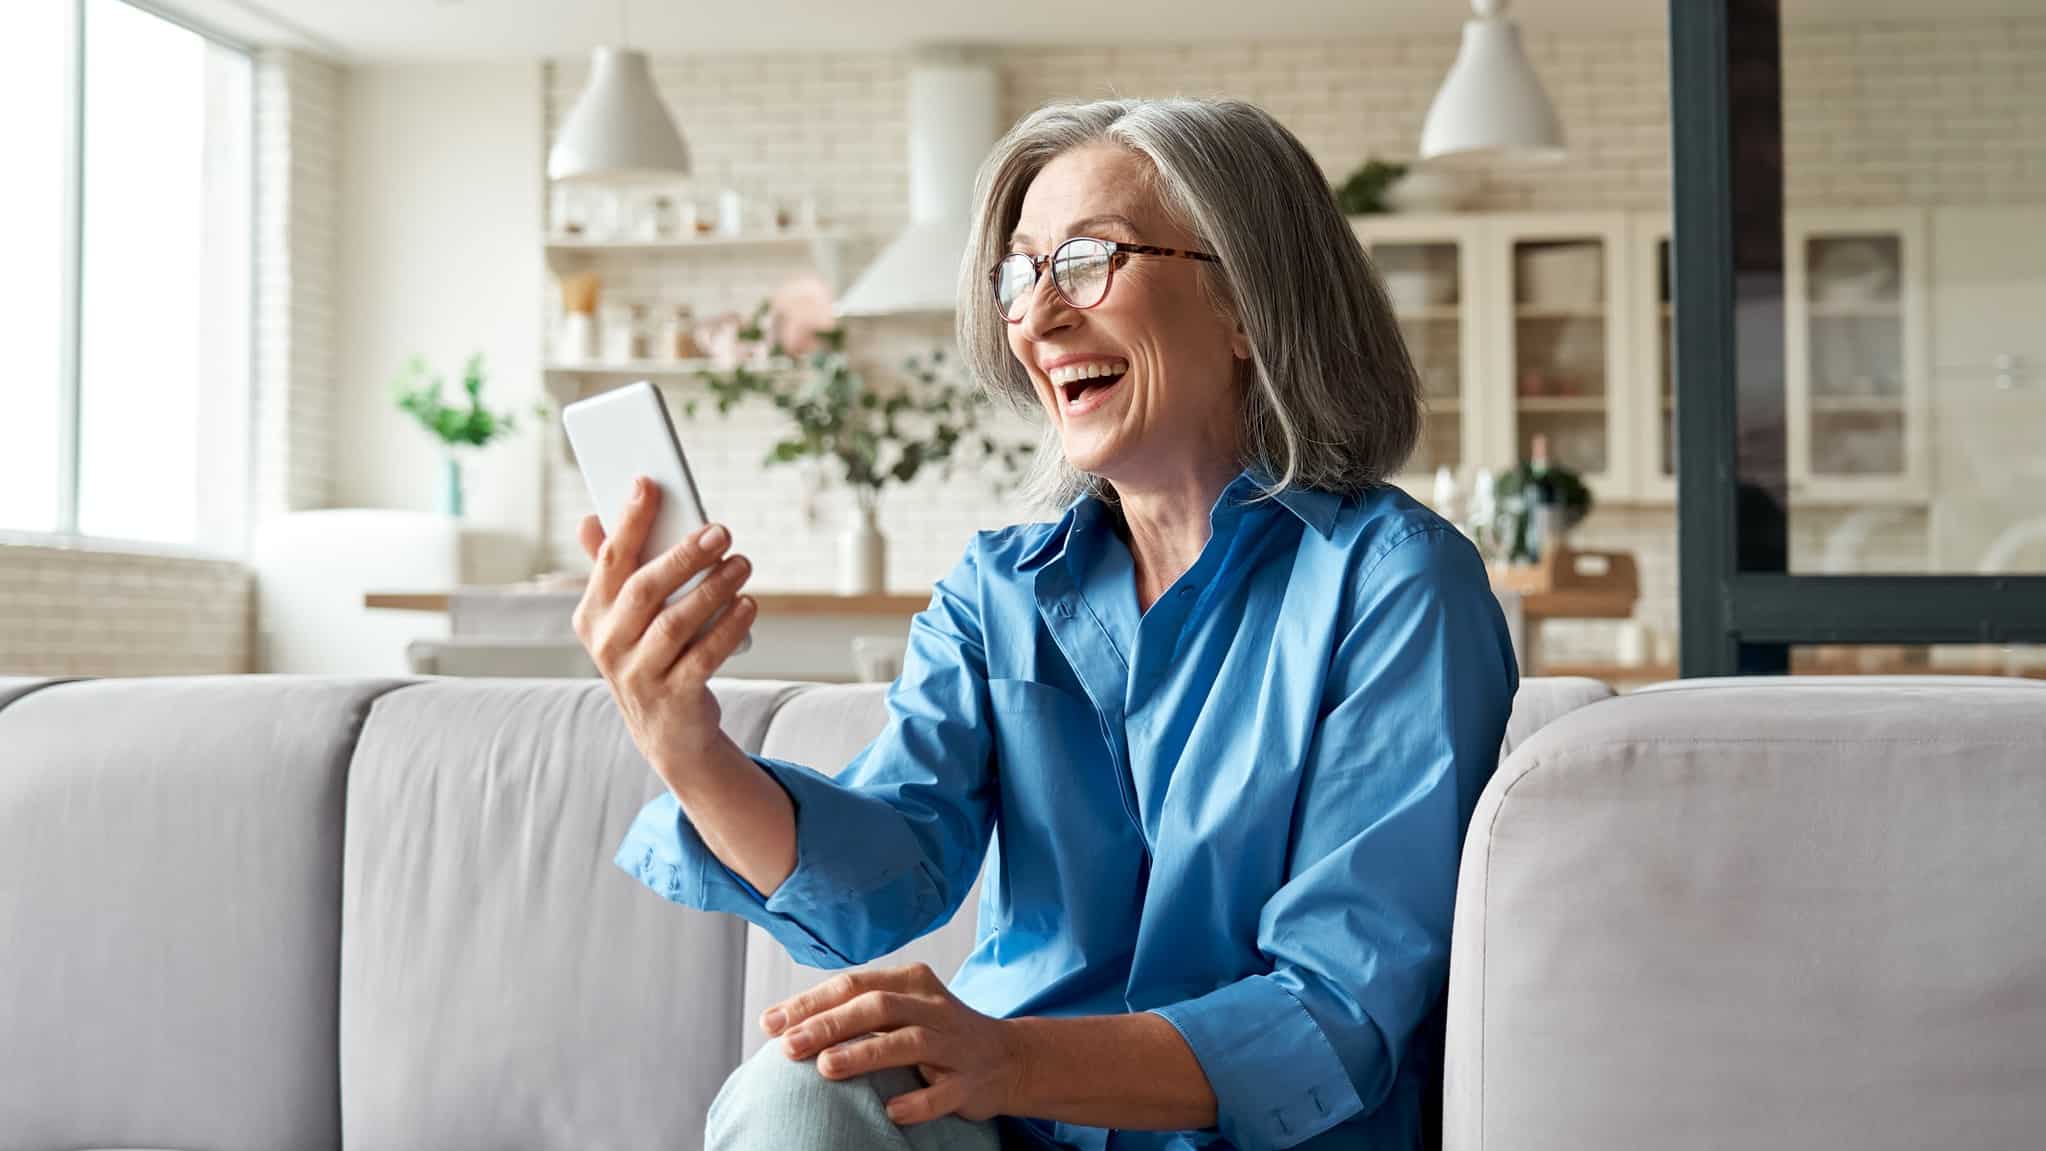 A sophisticated older lady with shoulder-length grey hair and glasses sits on her couch laughing while looking at her Antisense shares rising on her smartphone